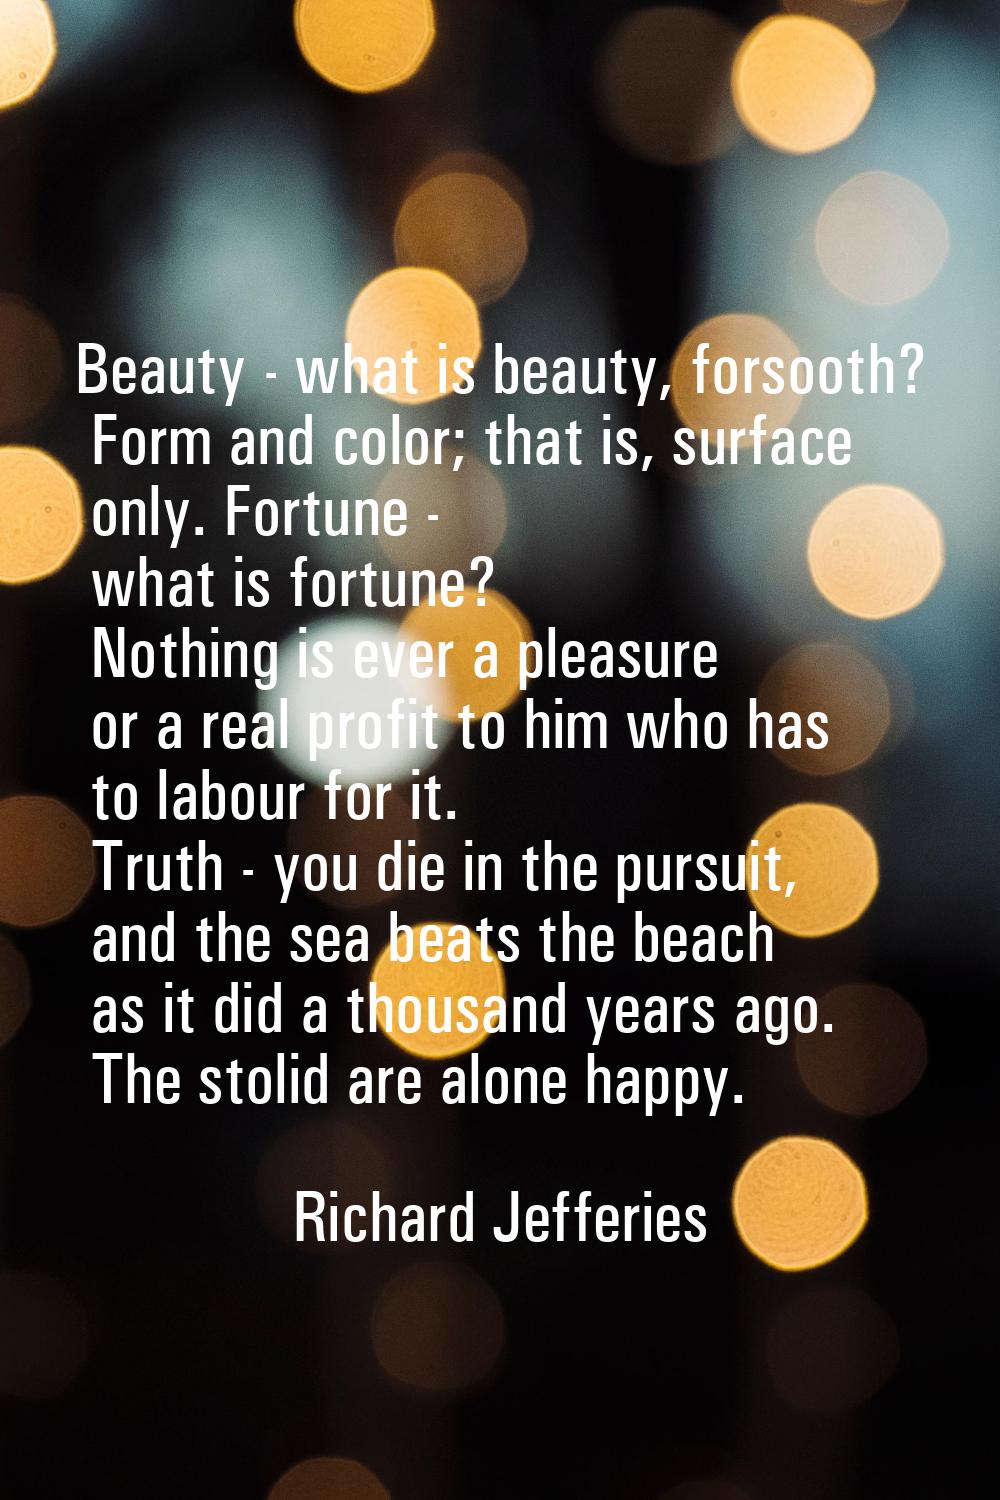 Beauty - what is beauty, forsooth? Form and color; that is, surface only. Fortune - what is fortune